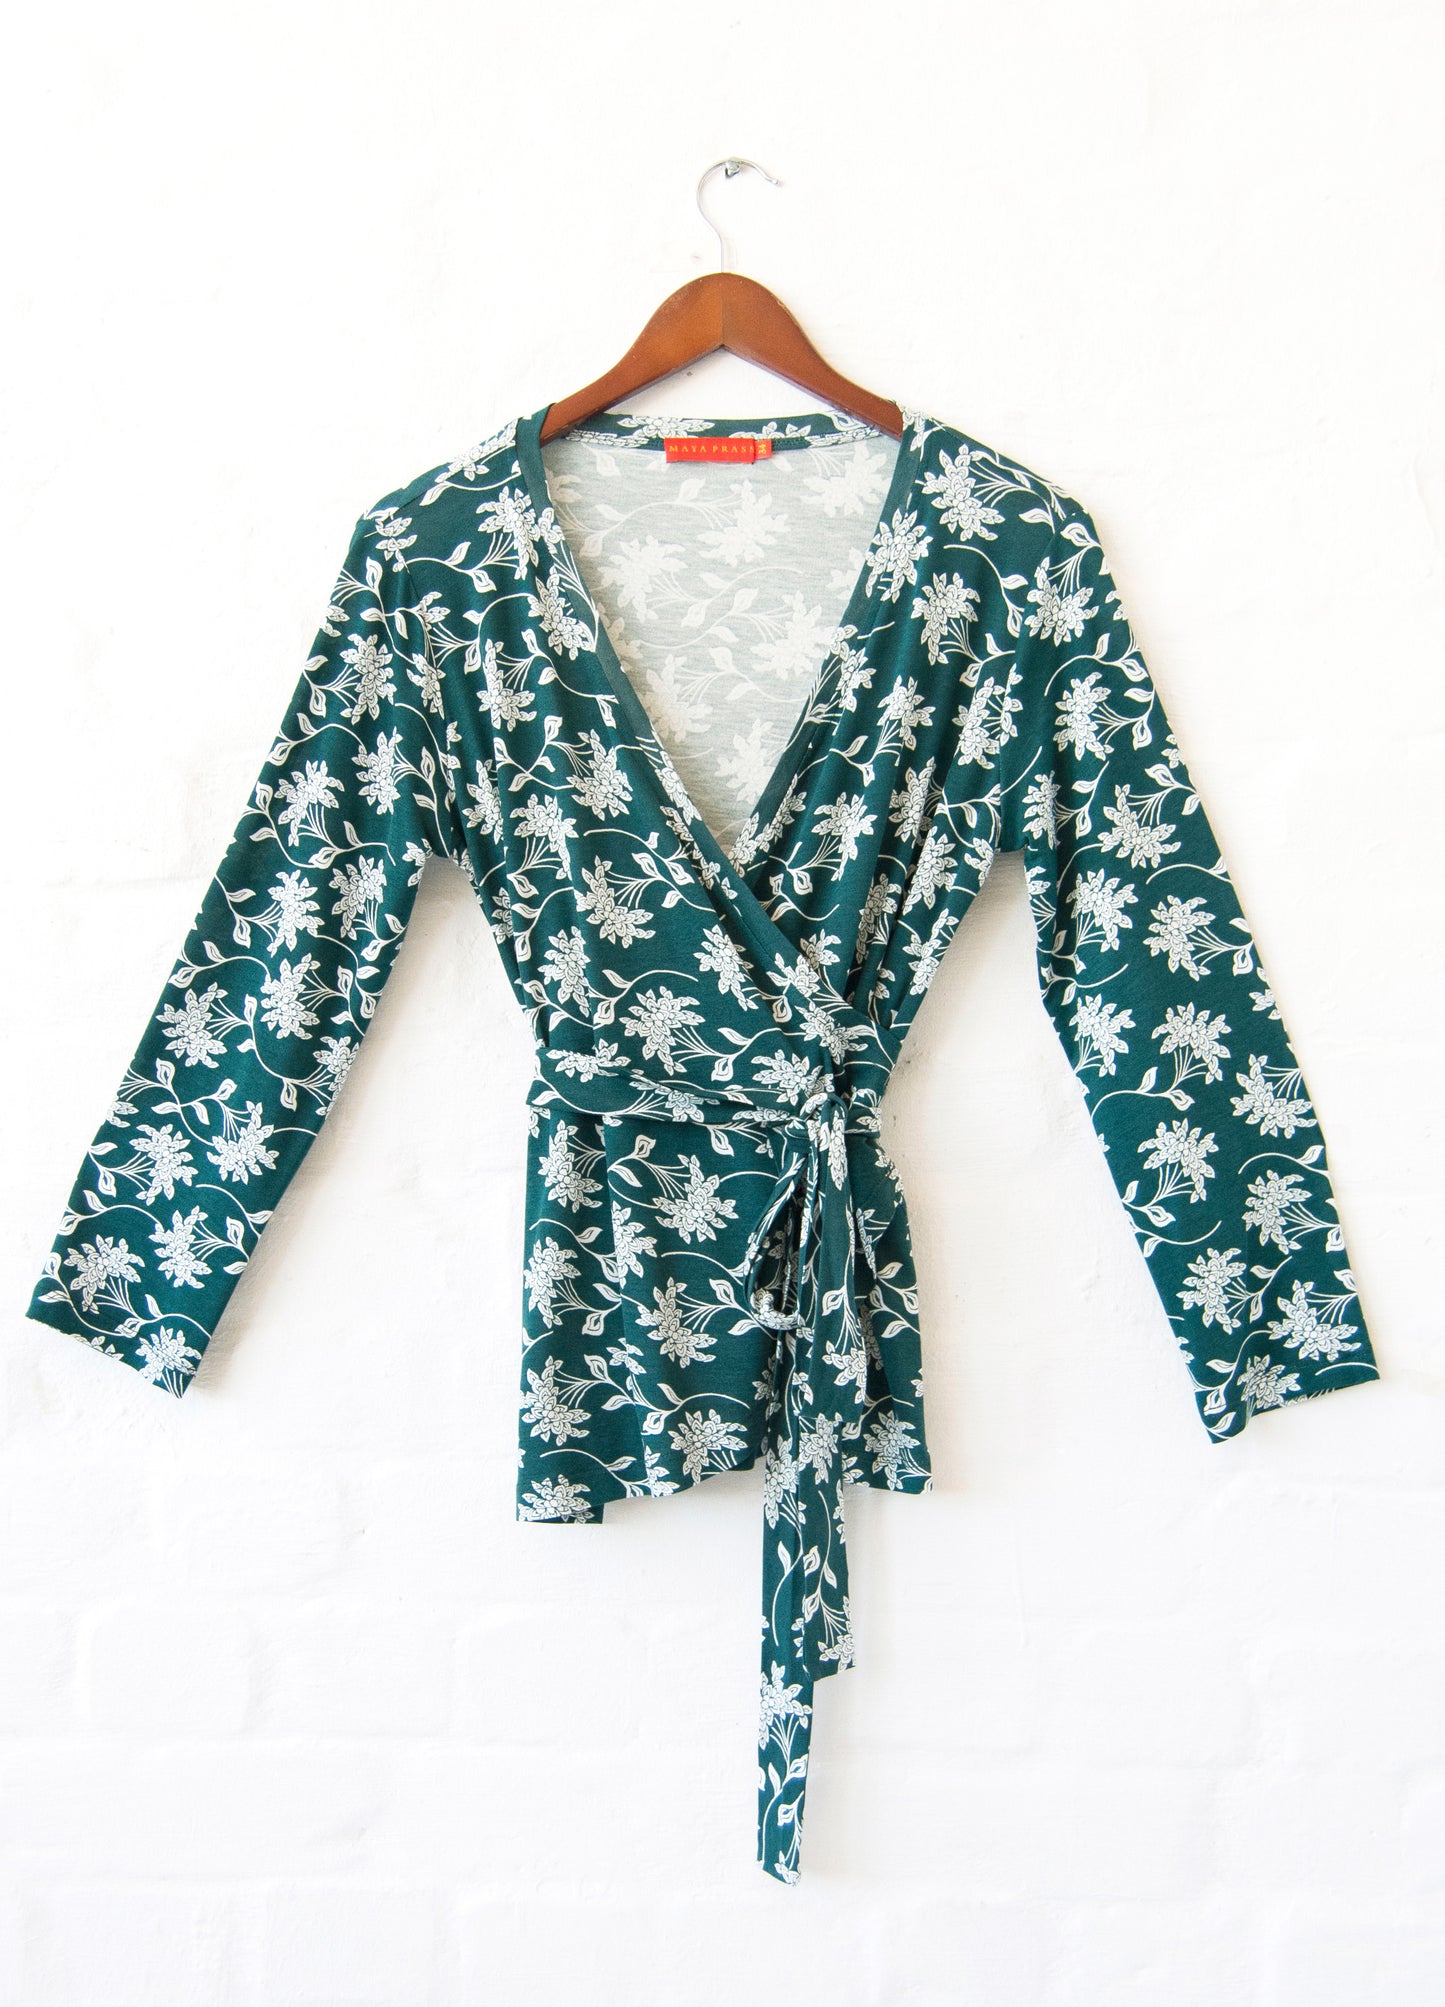 Elliot wrap top in forest Mahina Moon